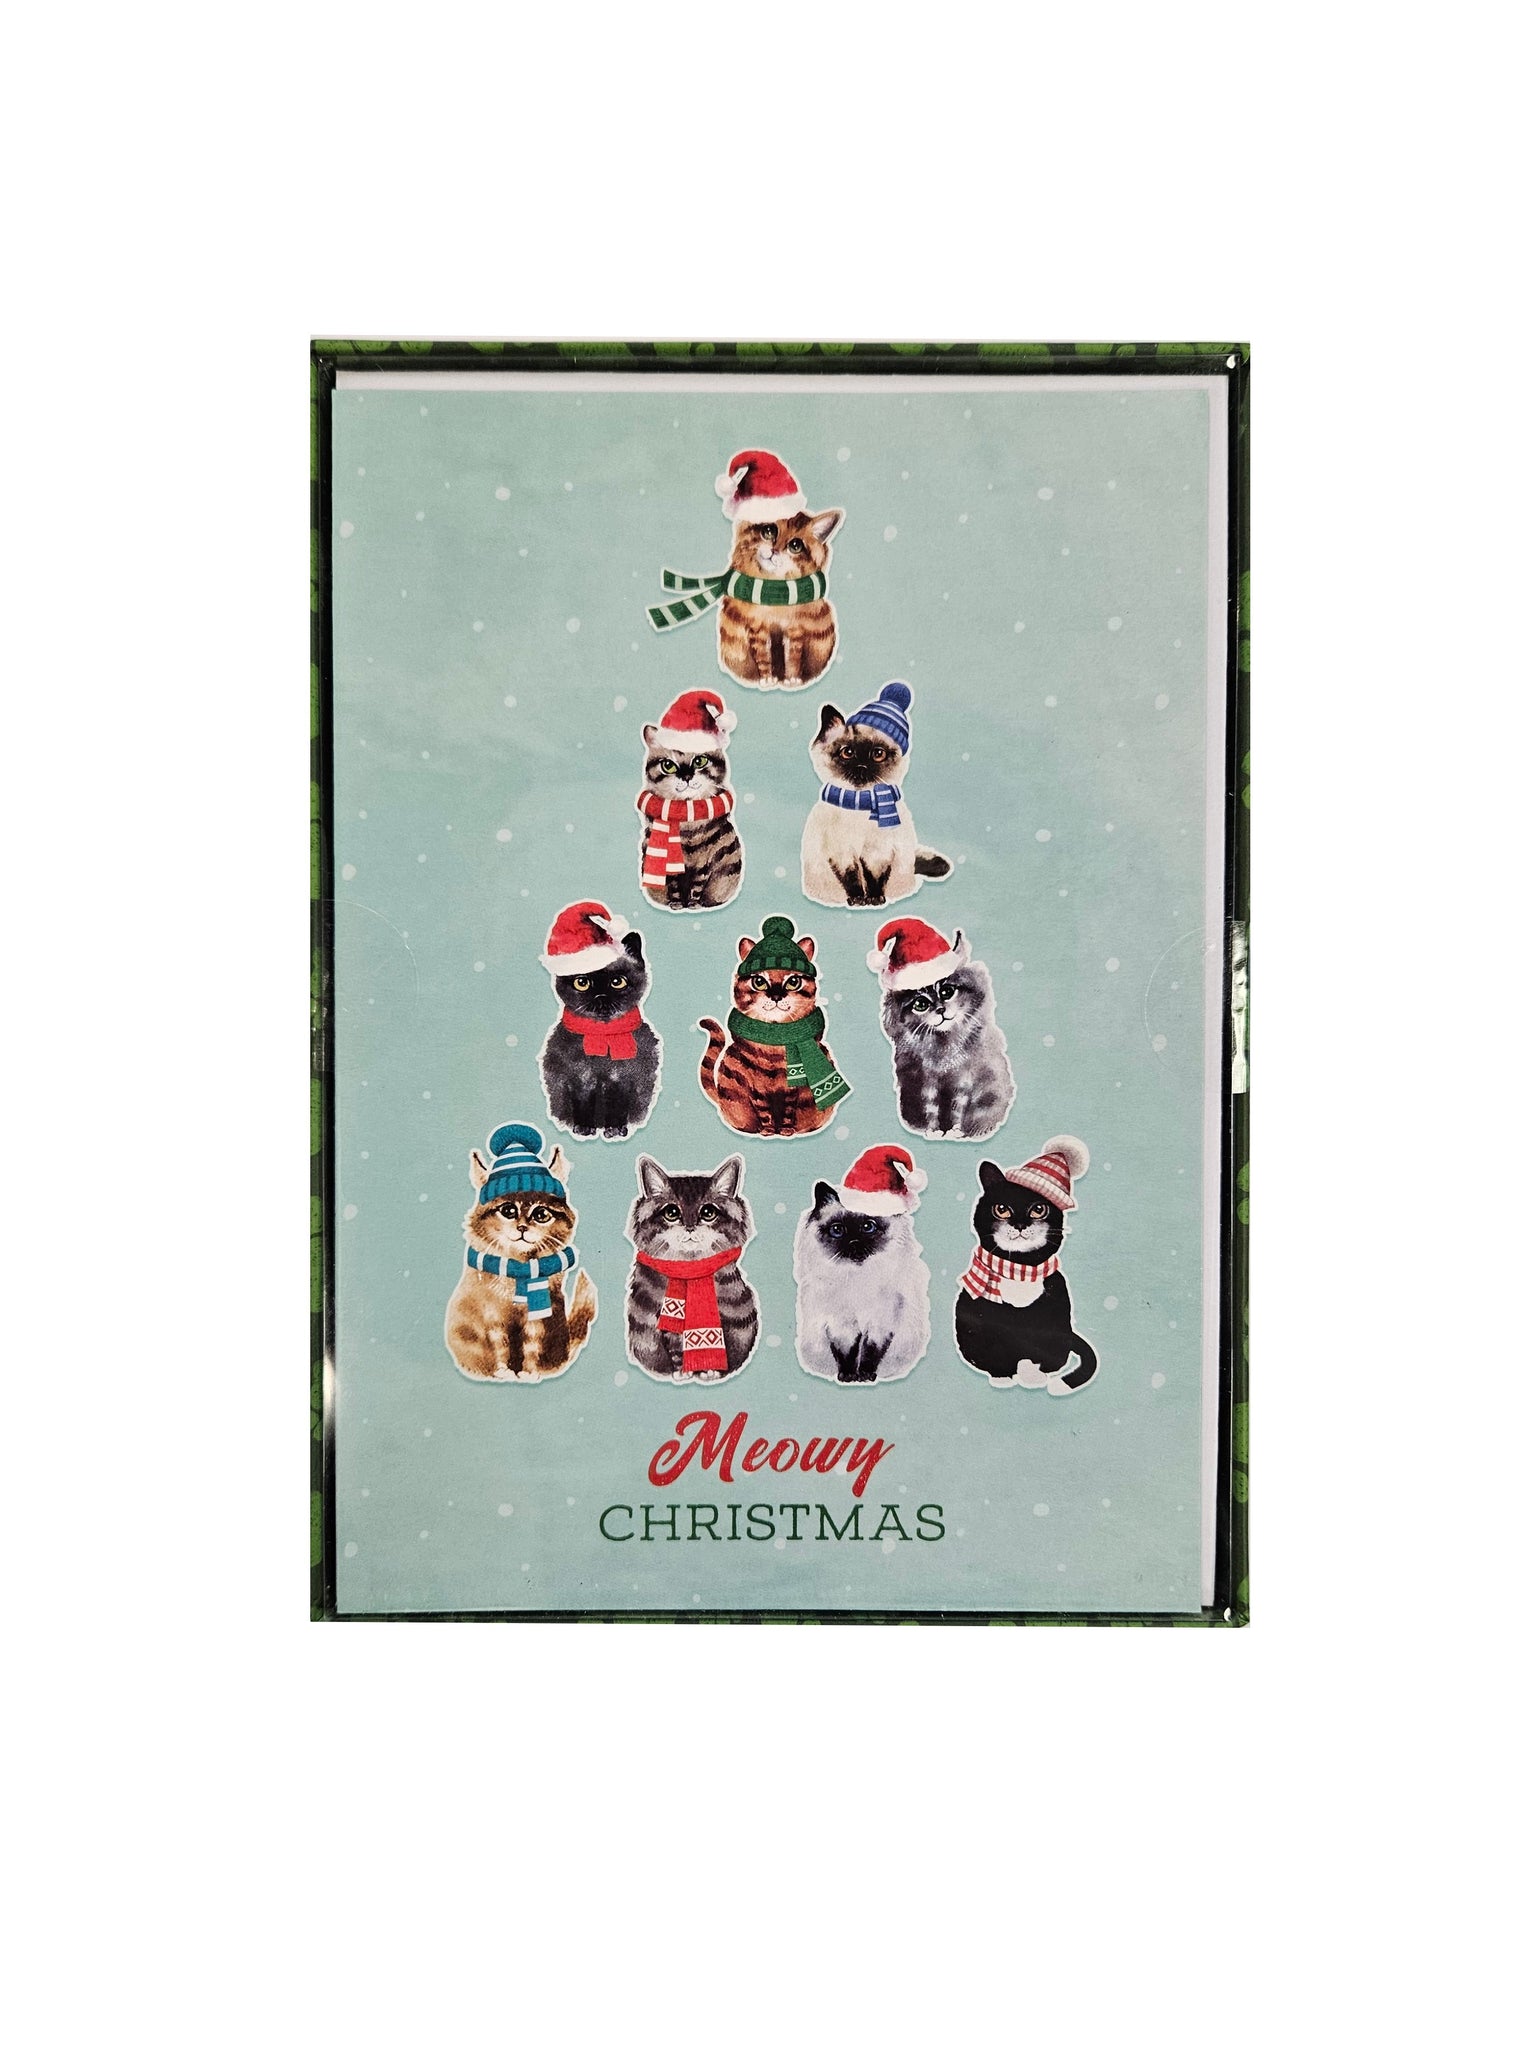 Meowy Christmas - Premium Boxed Holiday Cards - 18ct.